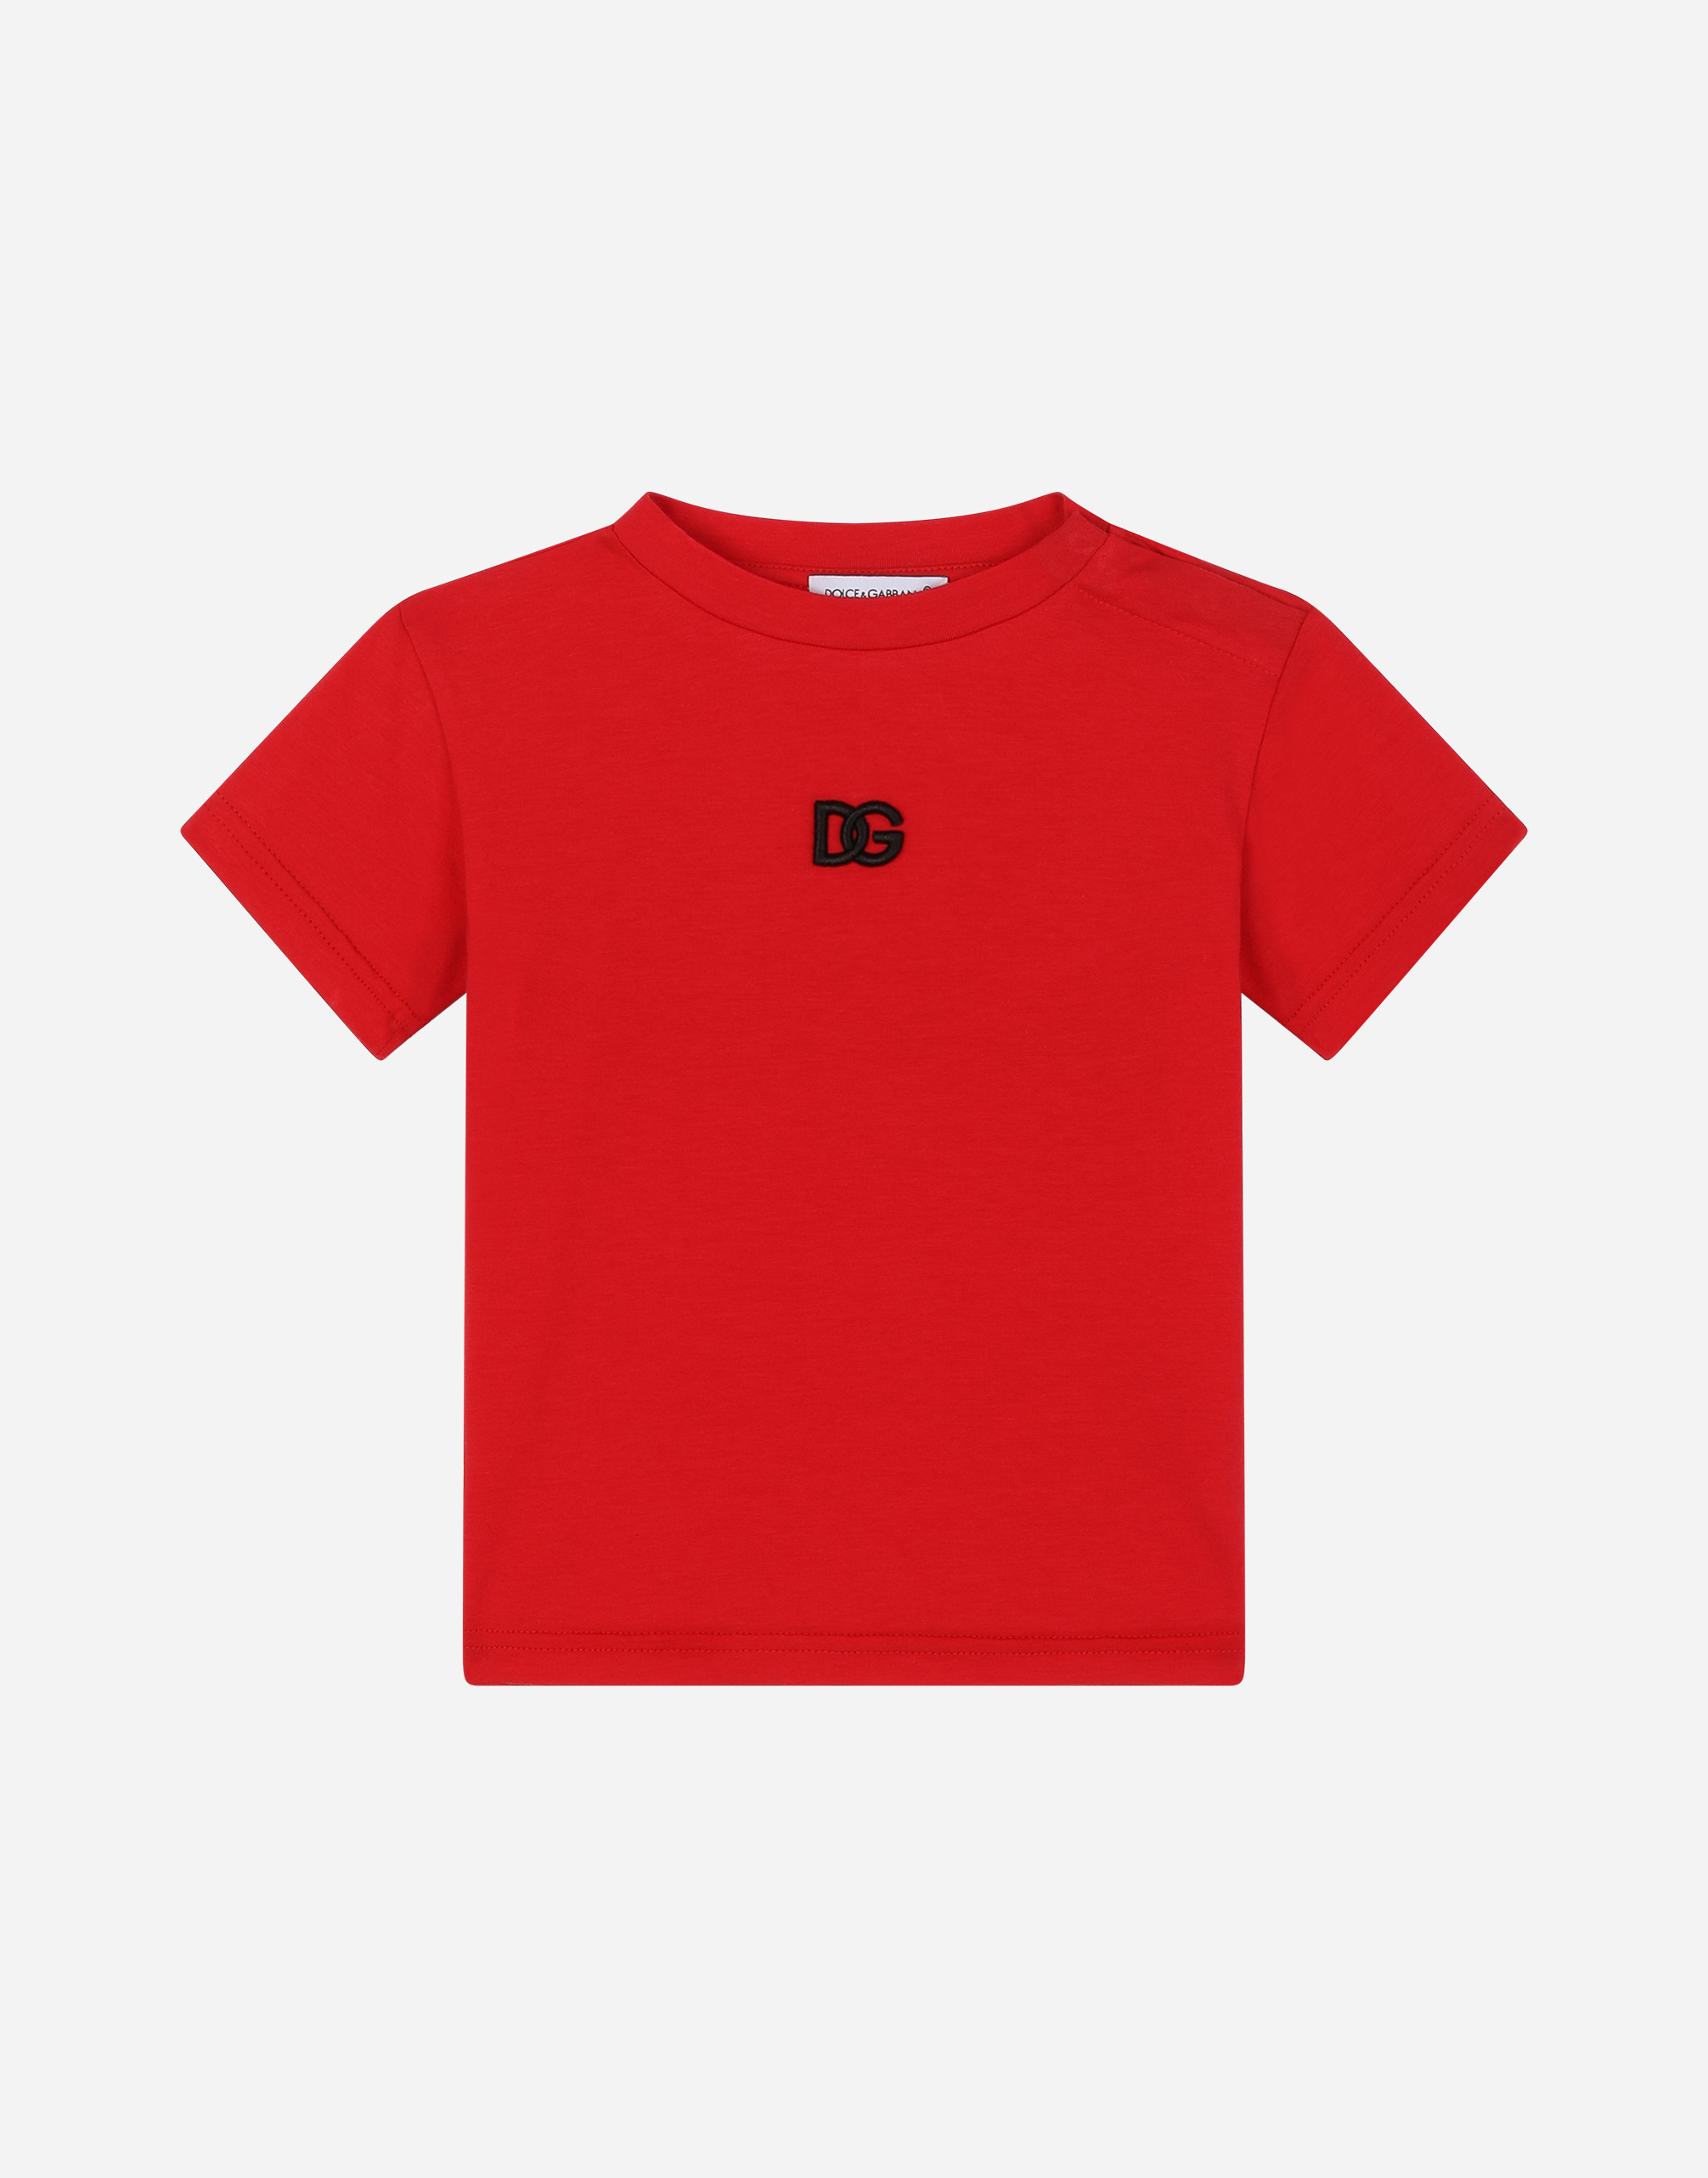 Printed jersey T-shirt with DG logo in Red